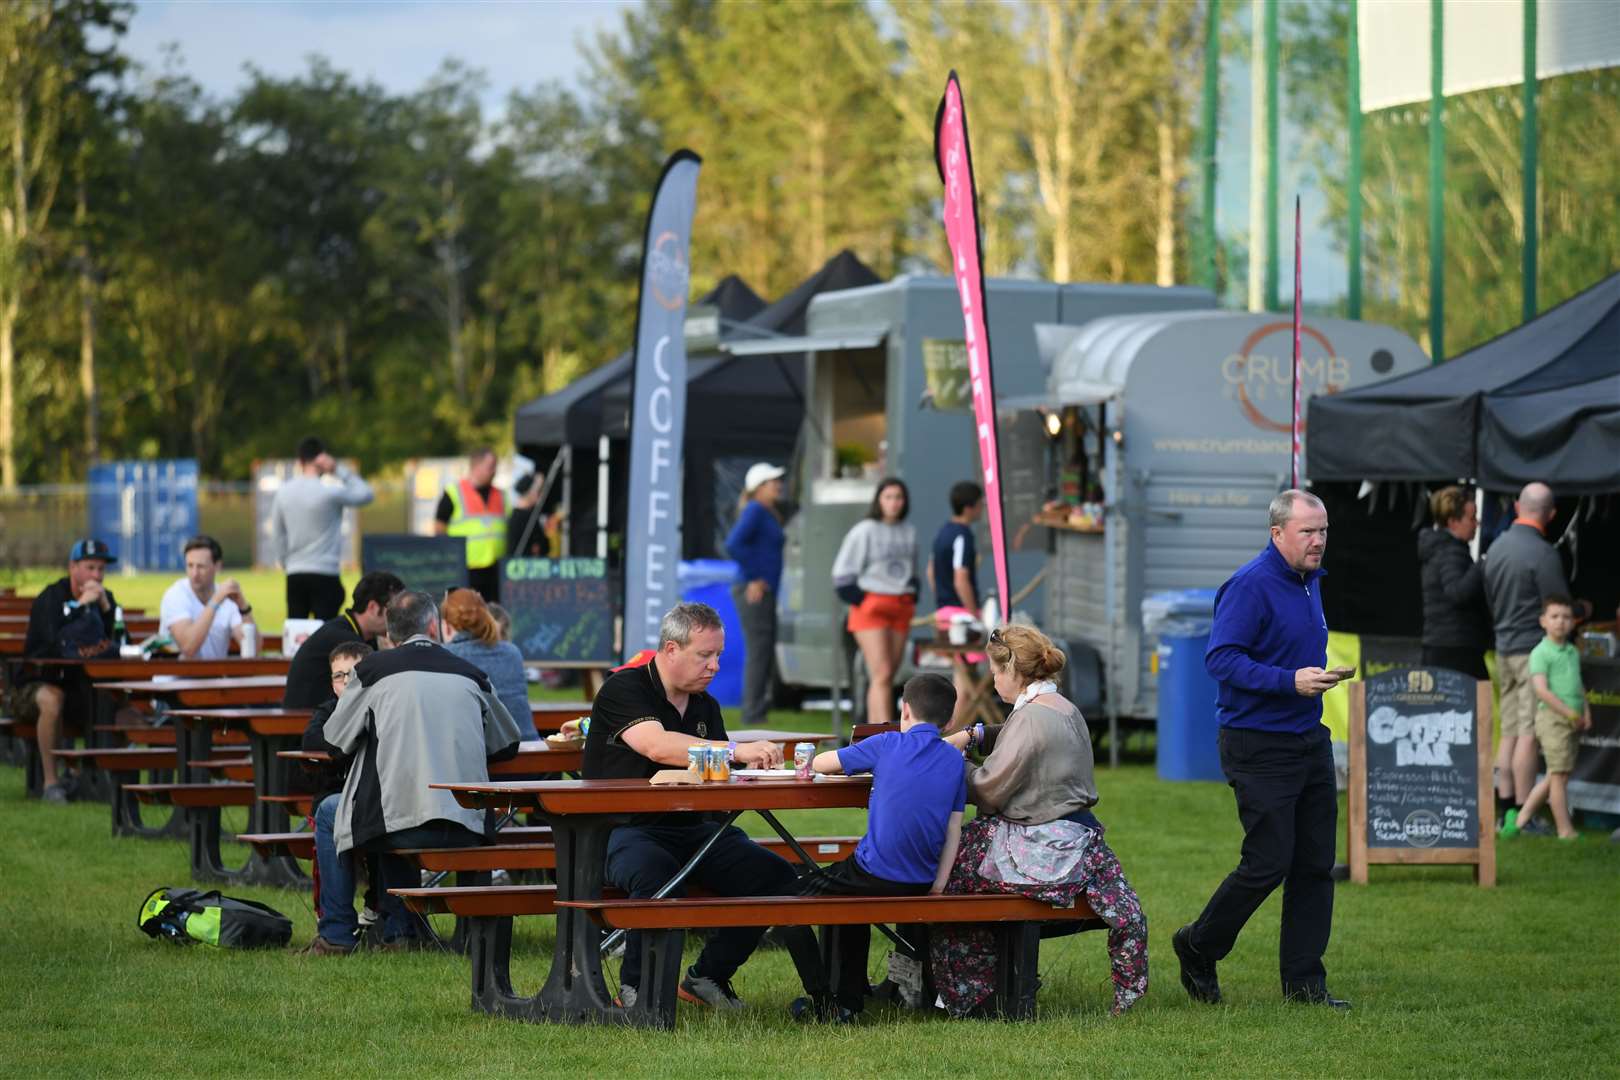 The Open Camping Village offers food, drink, activities and evening entertainment Picture: Caboose & Co